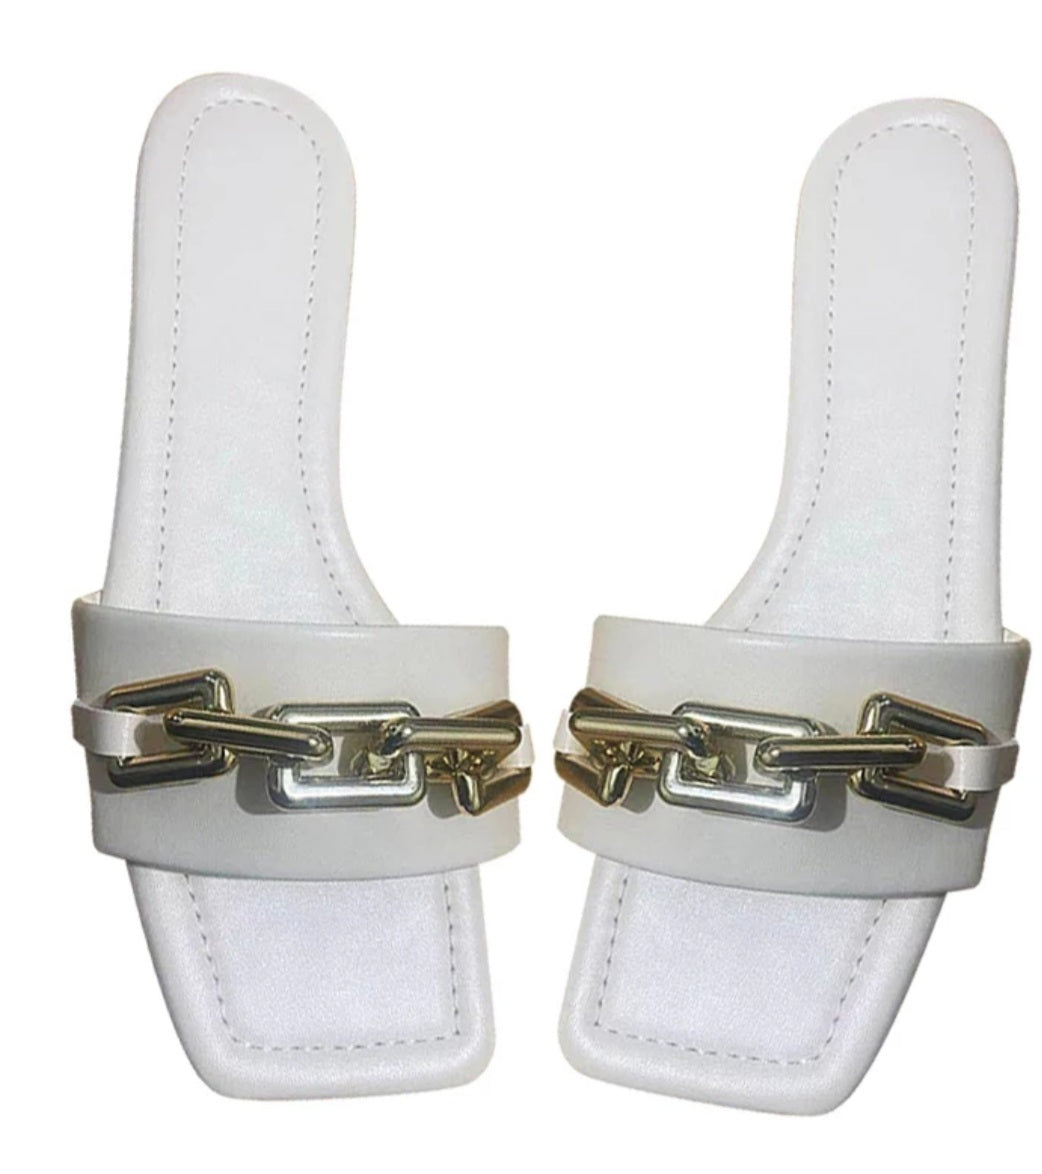 Chain Game Sandals